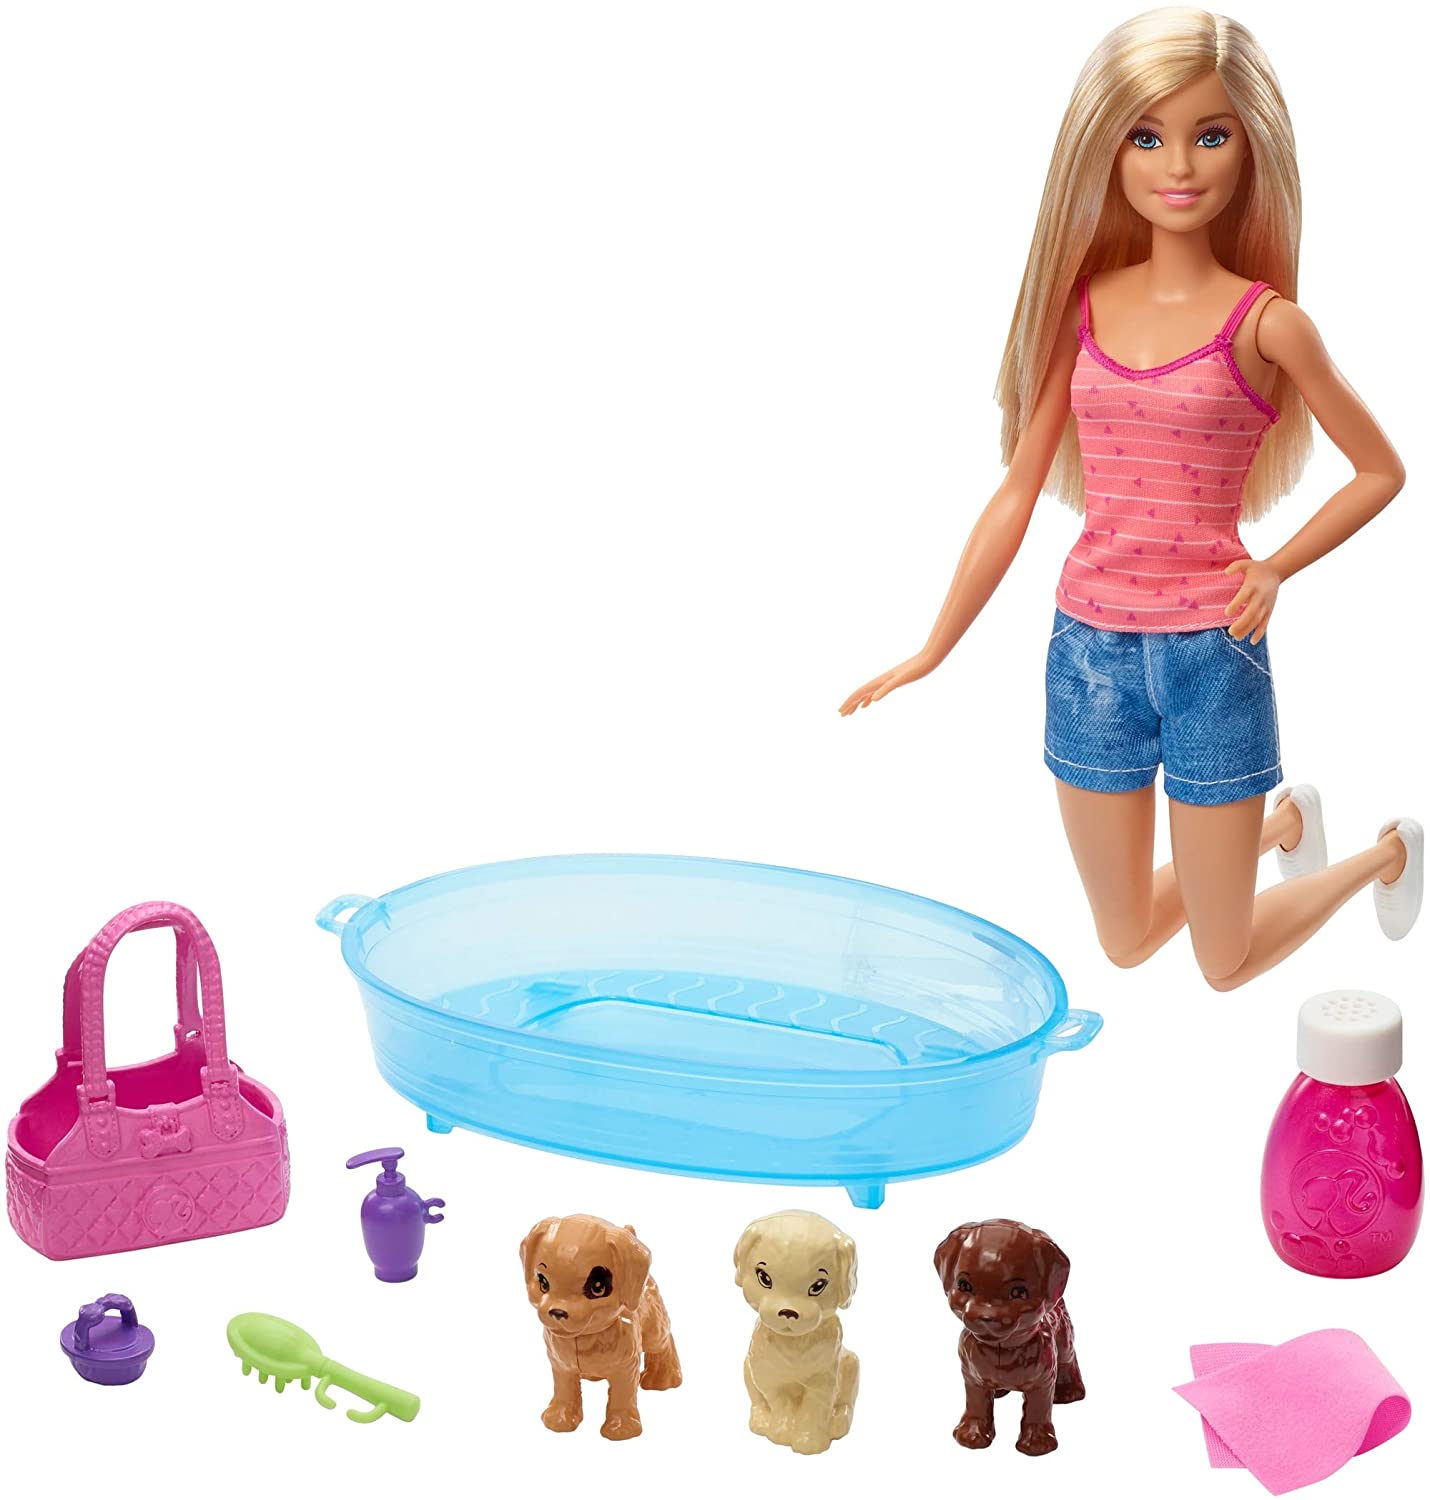 Barbie Blonde and Playset Doll